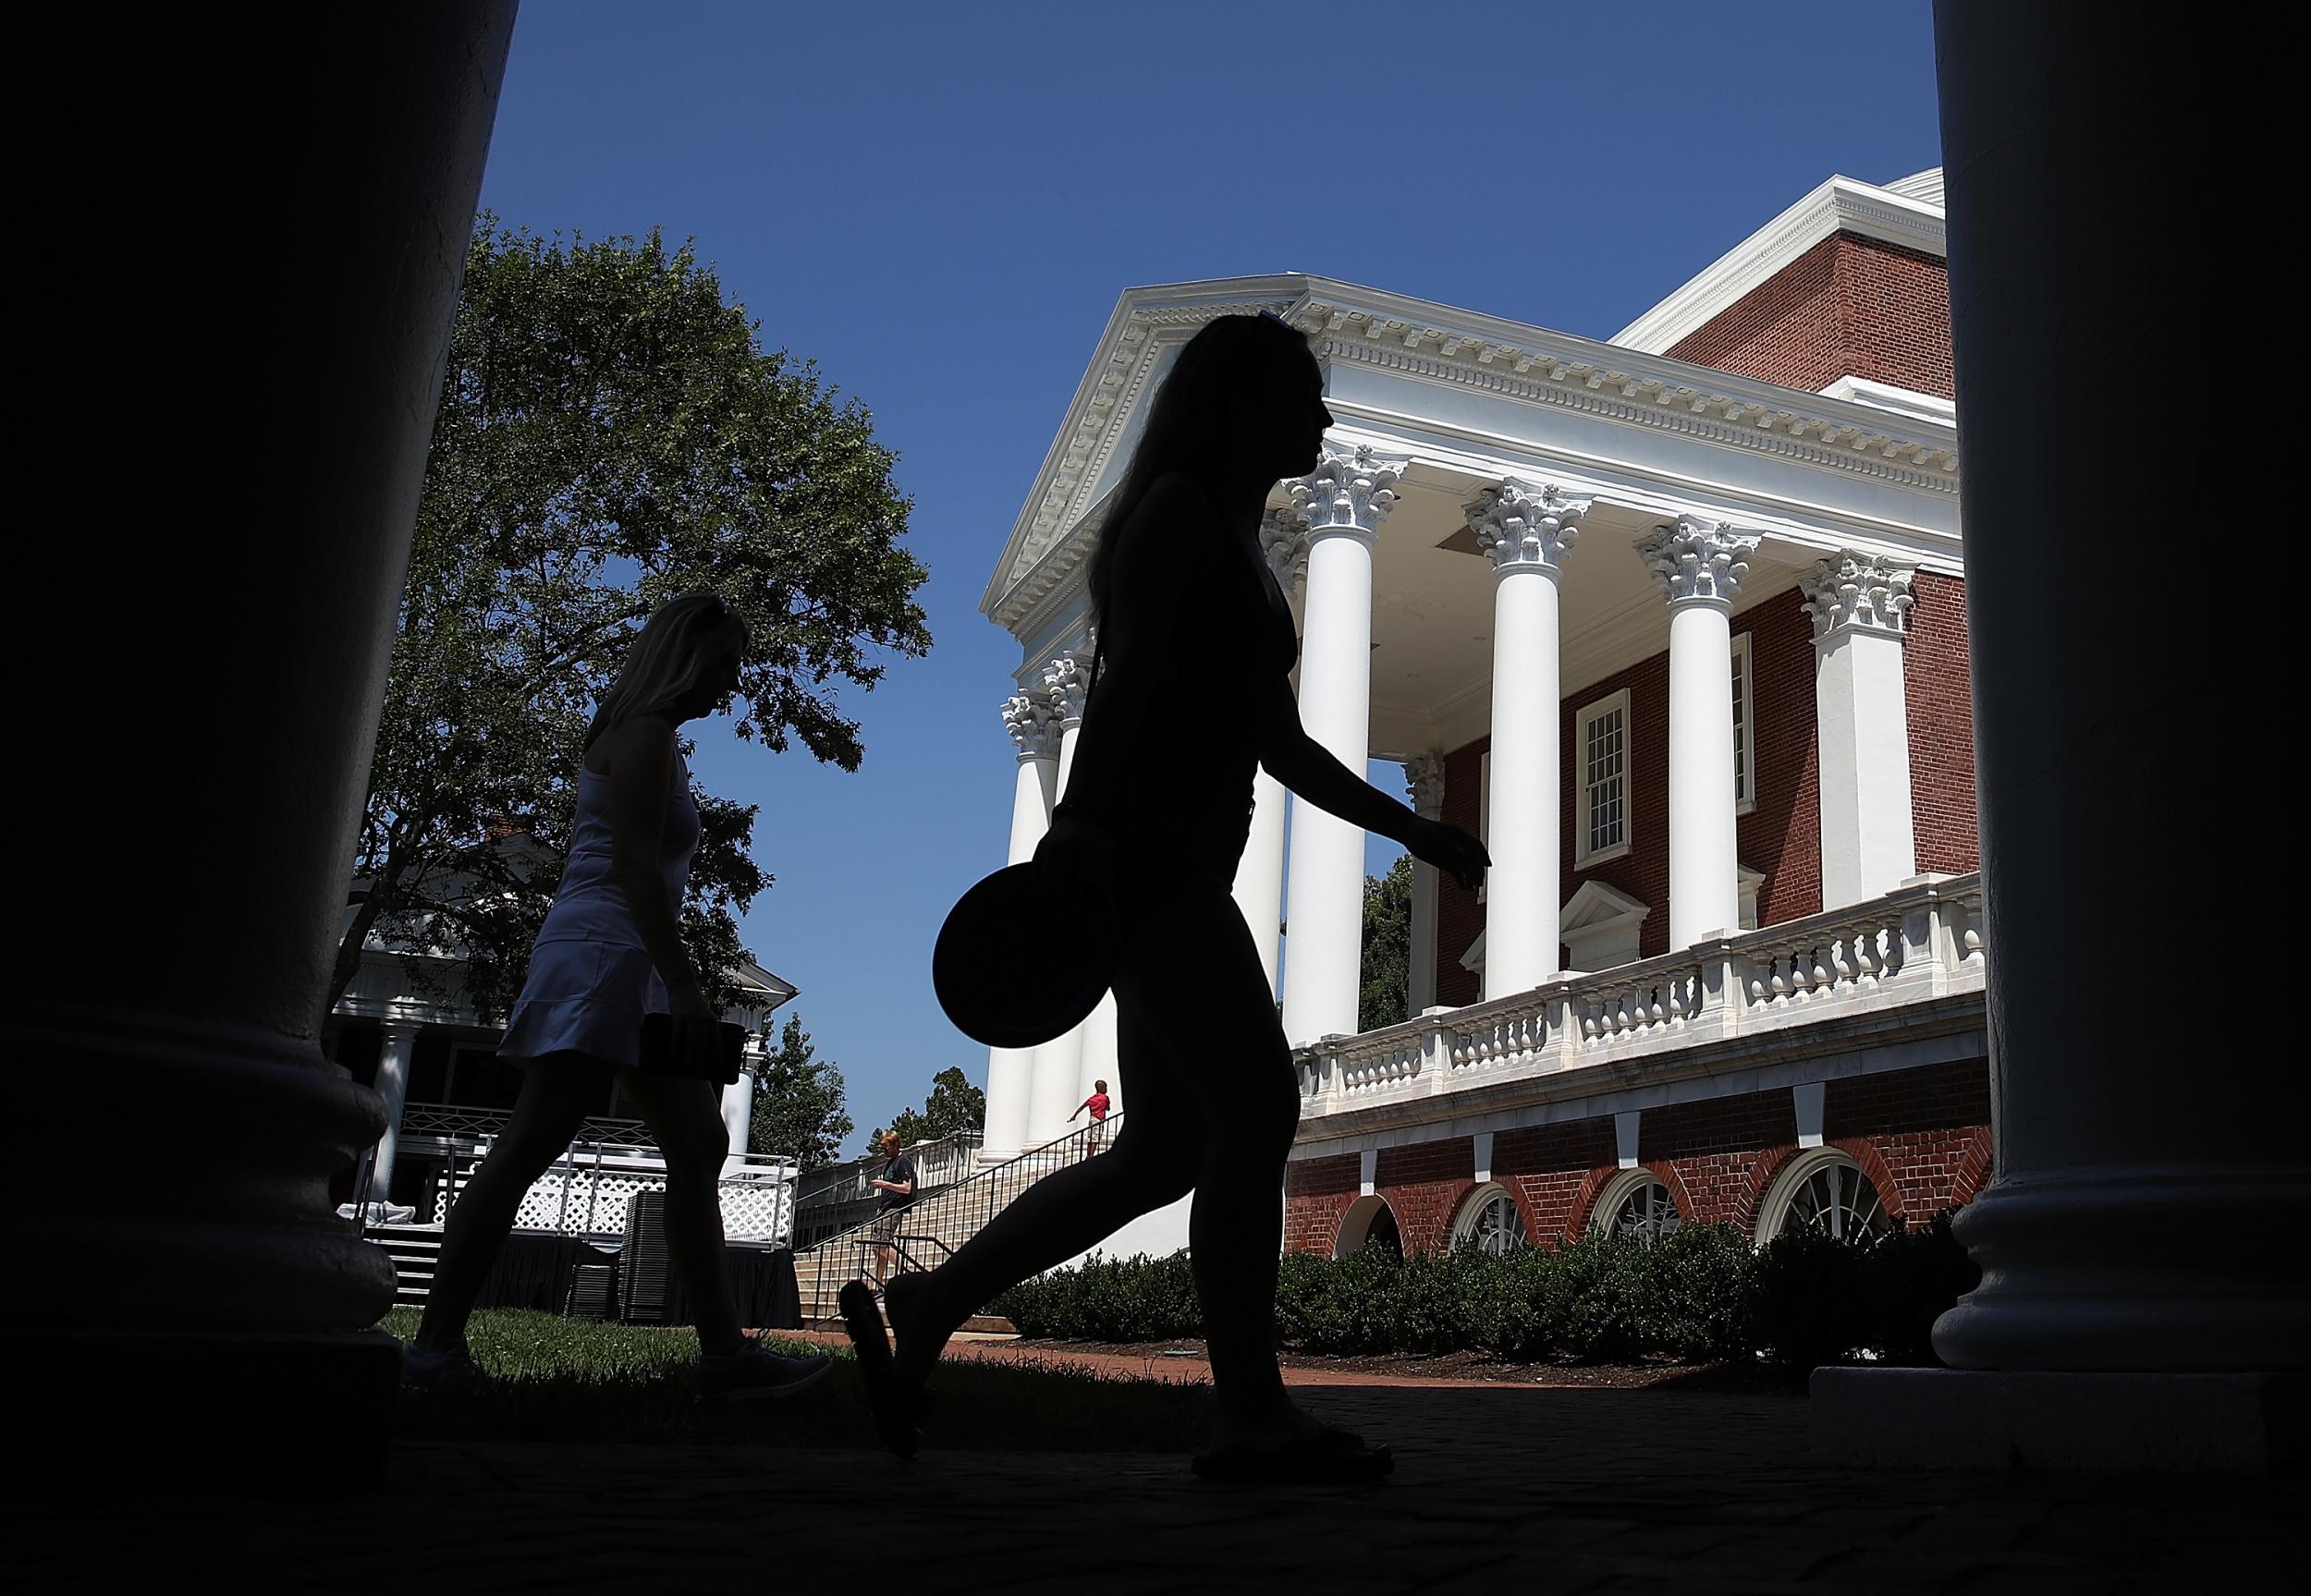 Students return to the University of Virginia after a white supremacist rally was held on campus over the summer